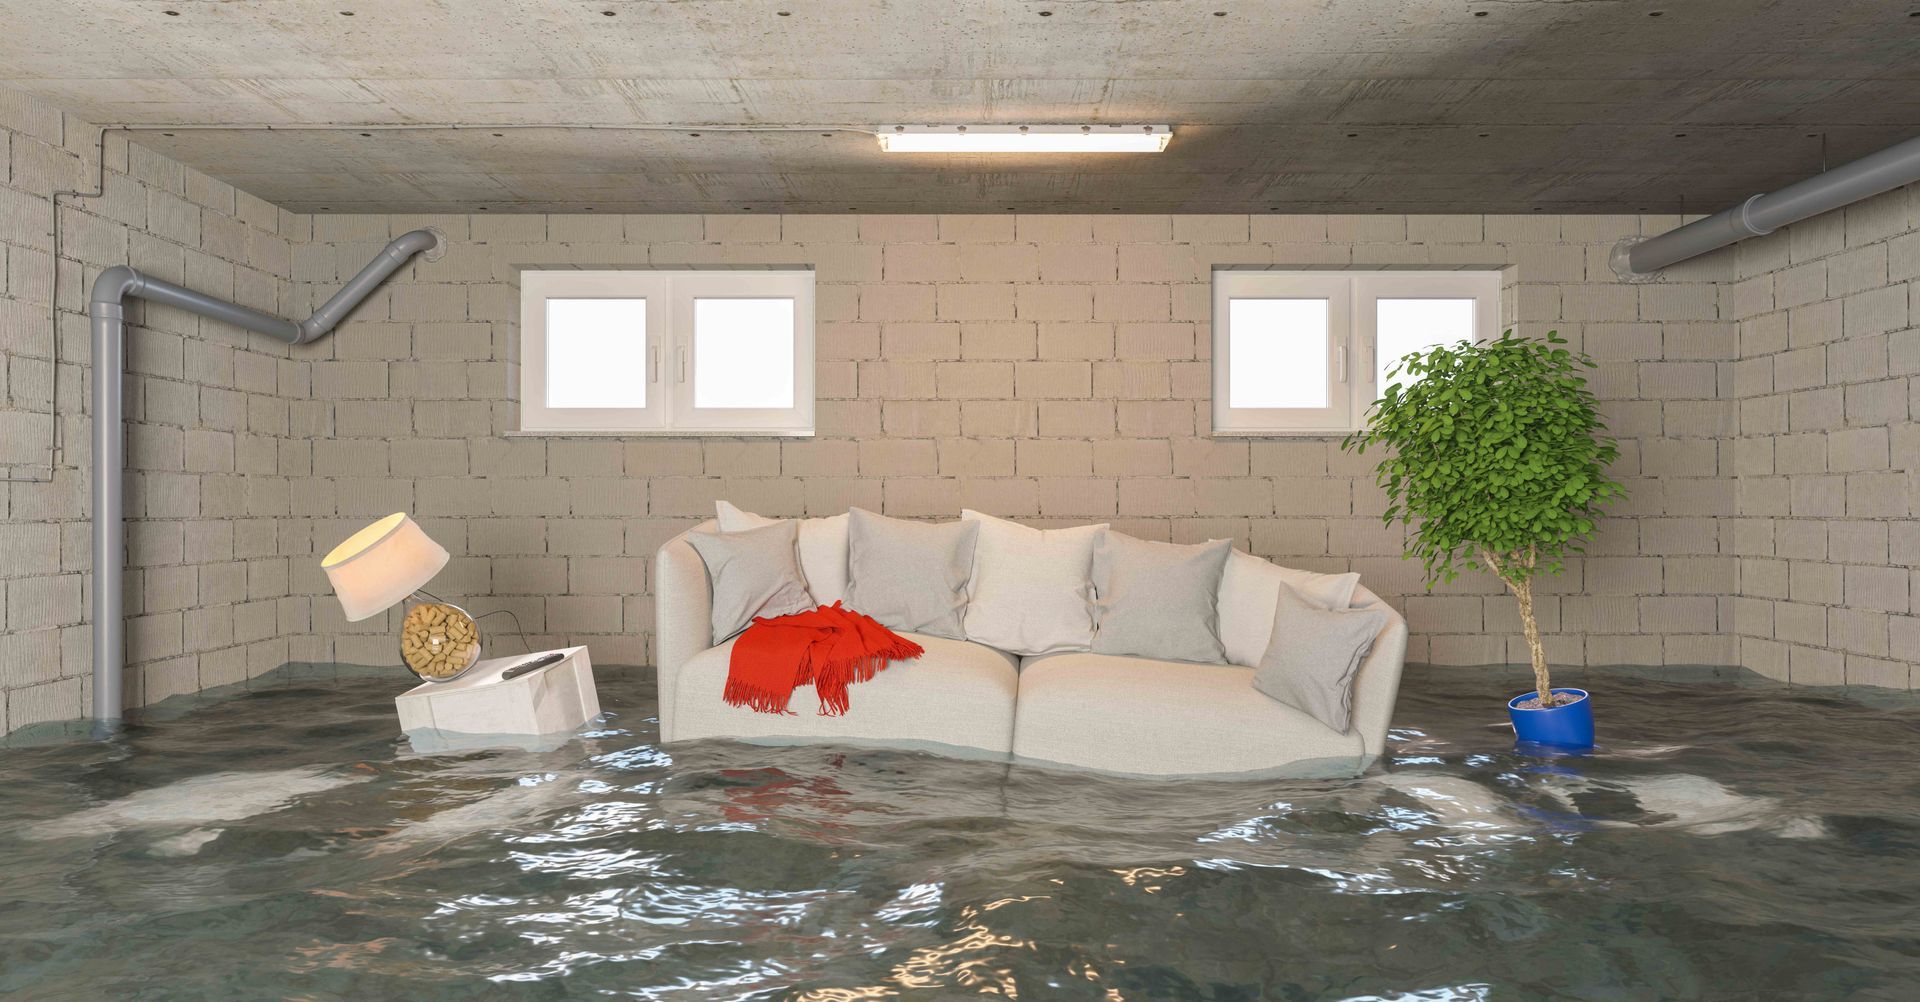 A living room filled with water and a couch